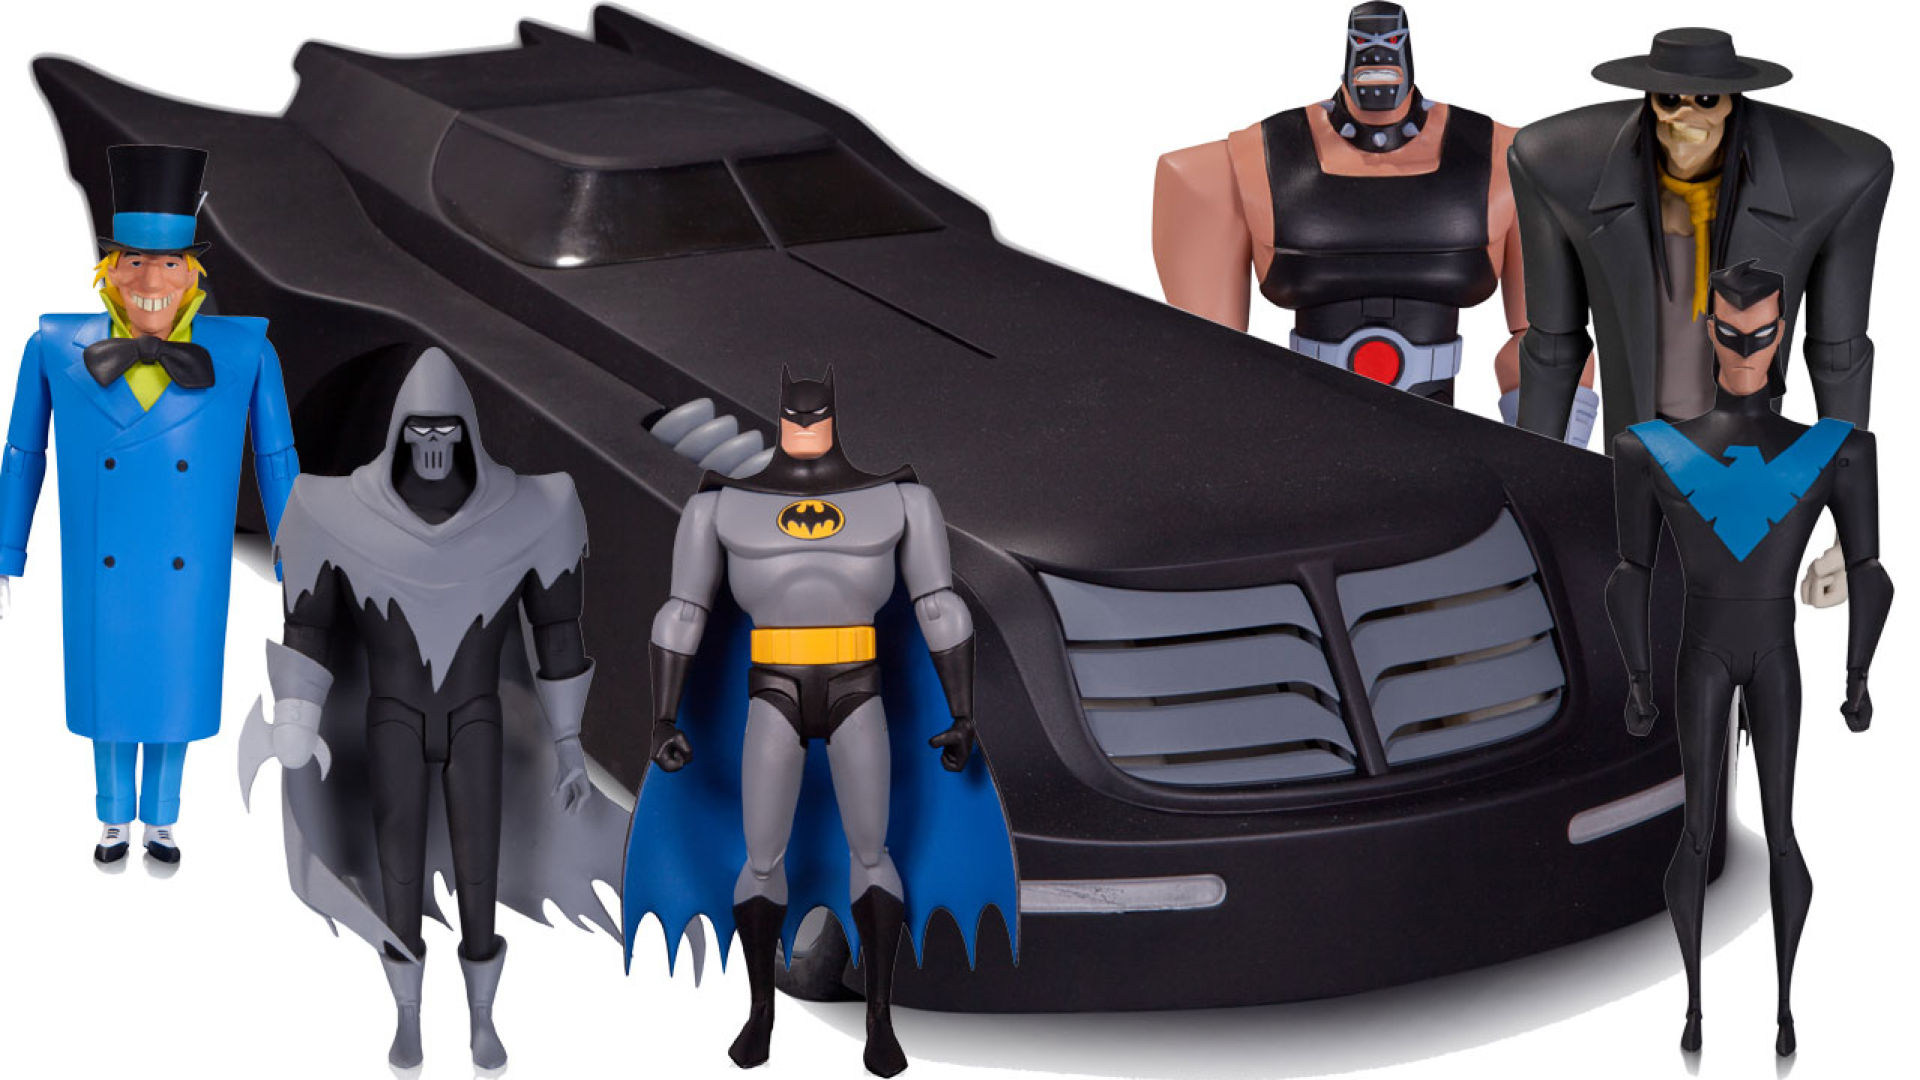 New DC Collectibles line includes 'Batman: The Animated Series' Batmobile  and lots more | Batman News